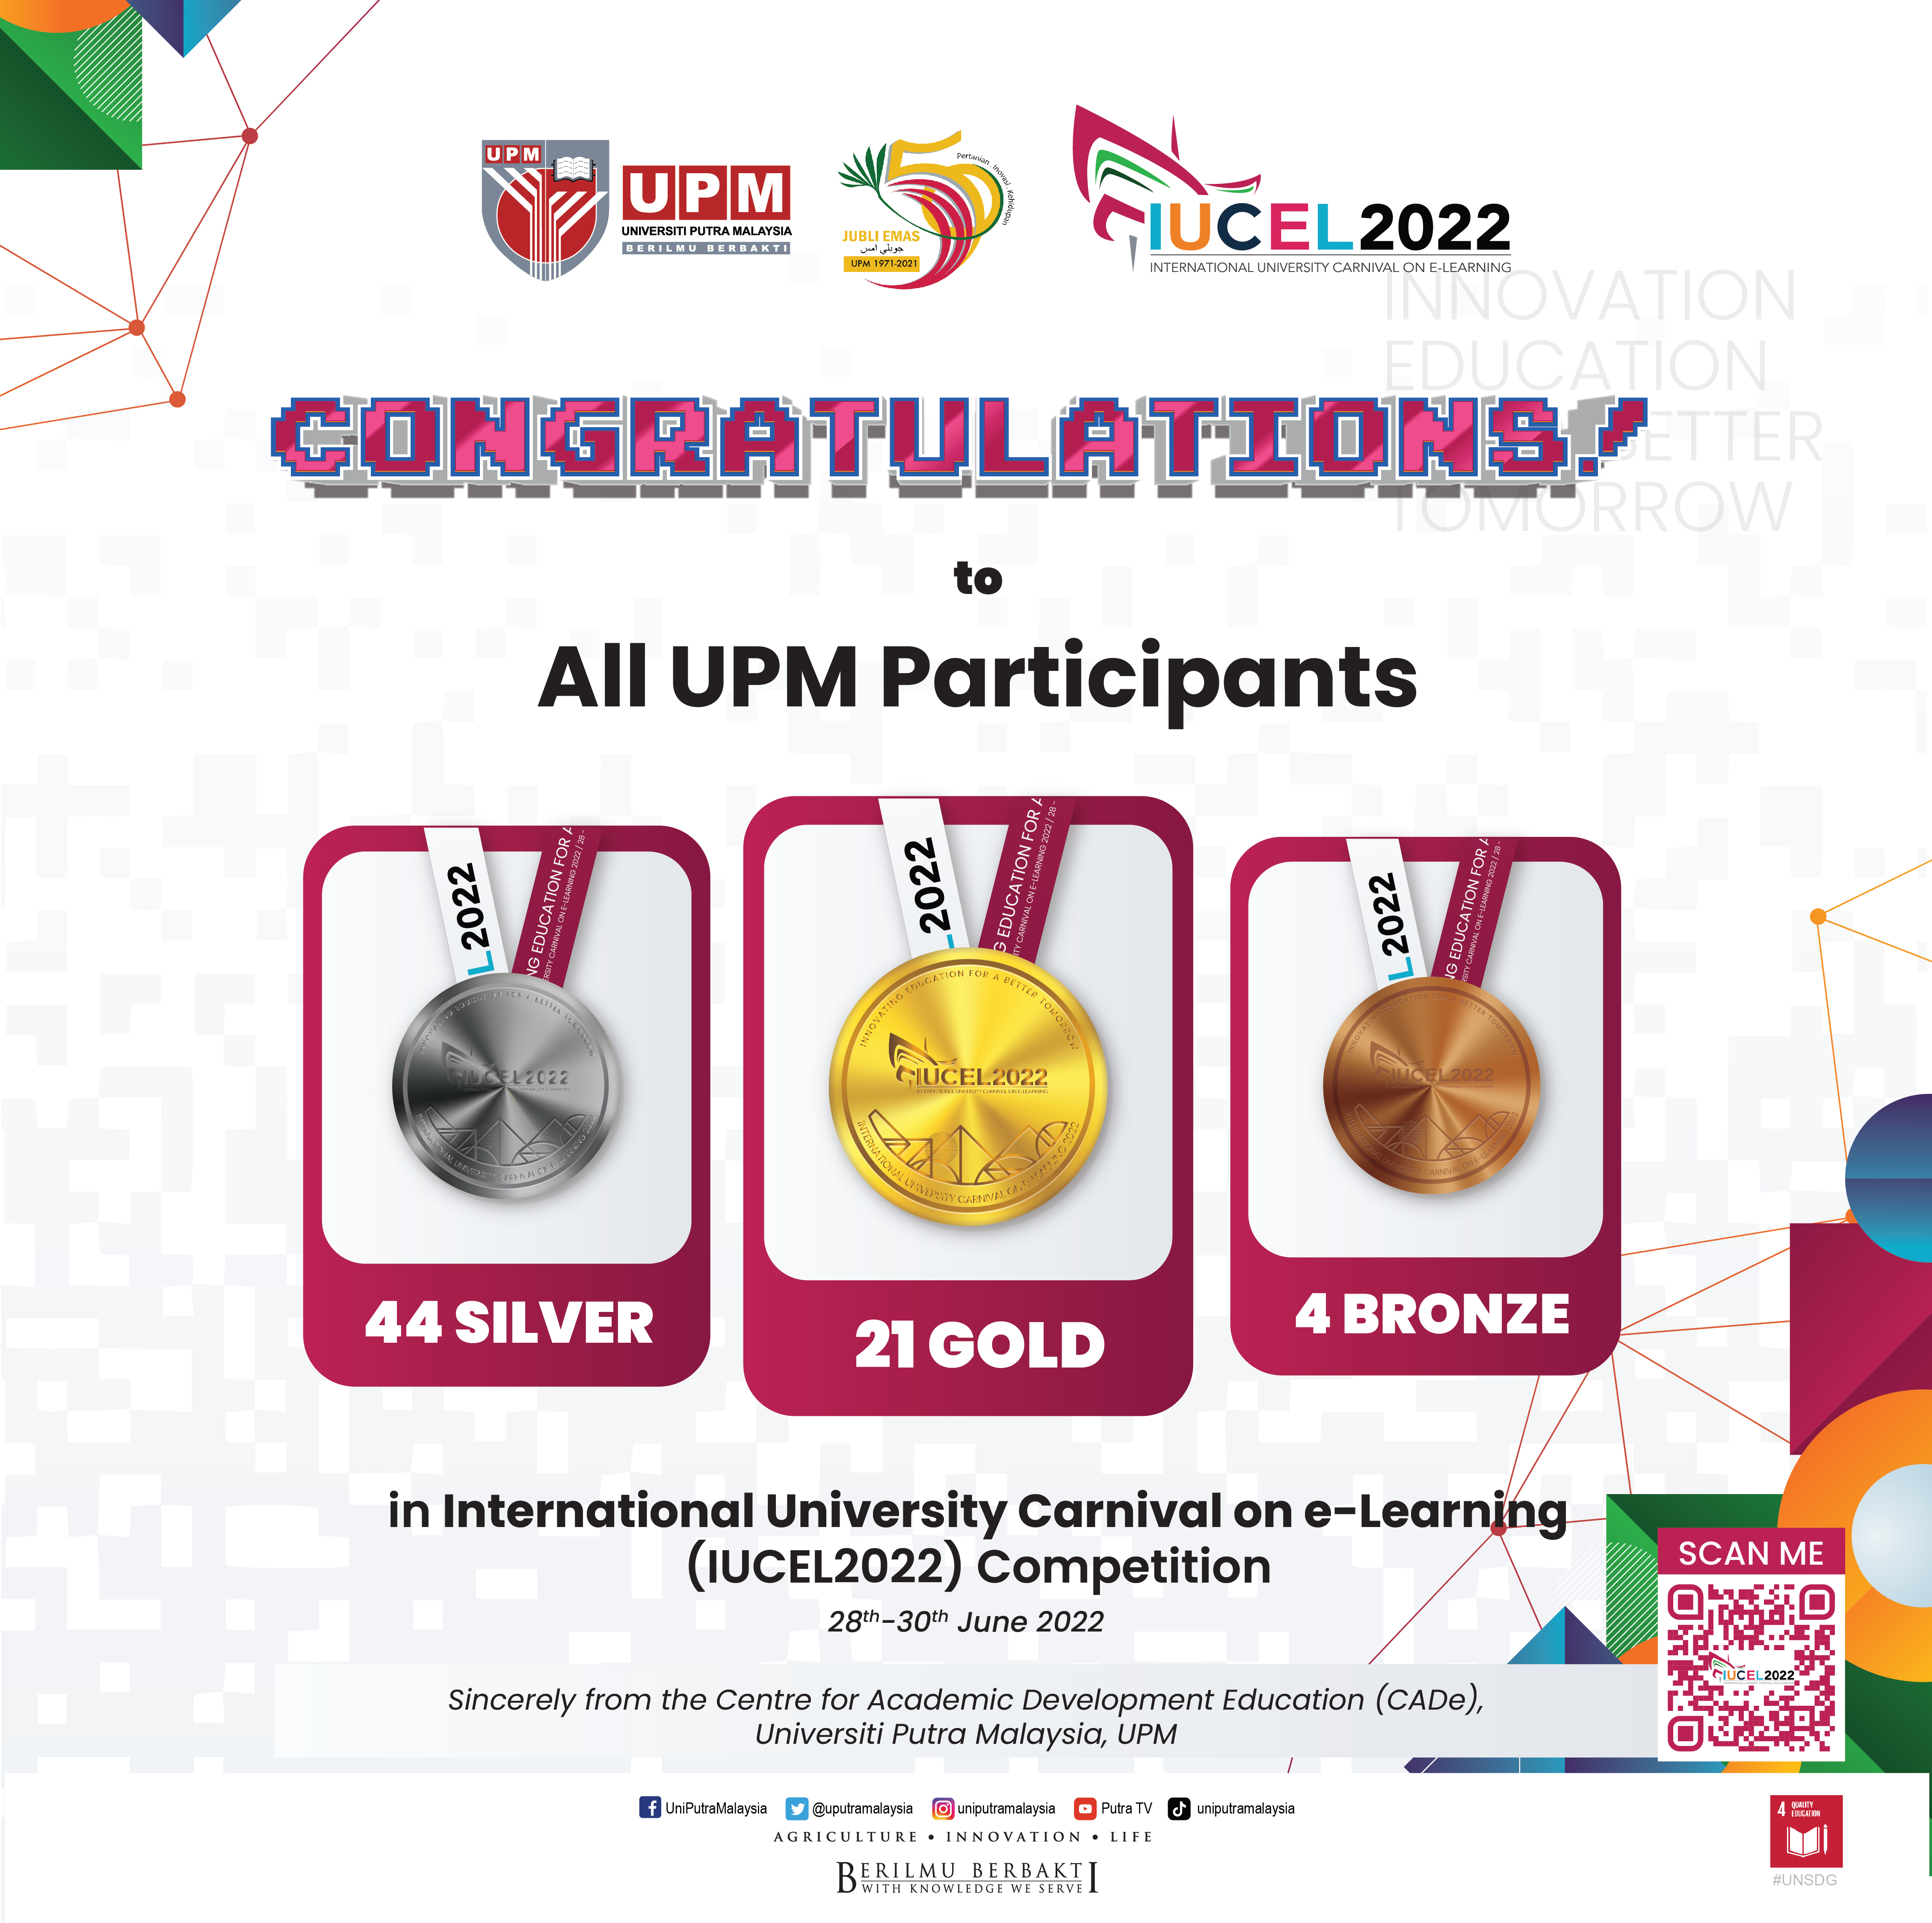 UPM Participants Stand Out at INTERNATIONAL UNIVERSITY CARNIVAL ON E-LEARNING 2022 (IUCEL2022)